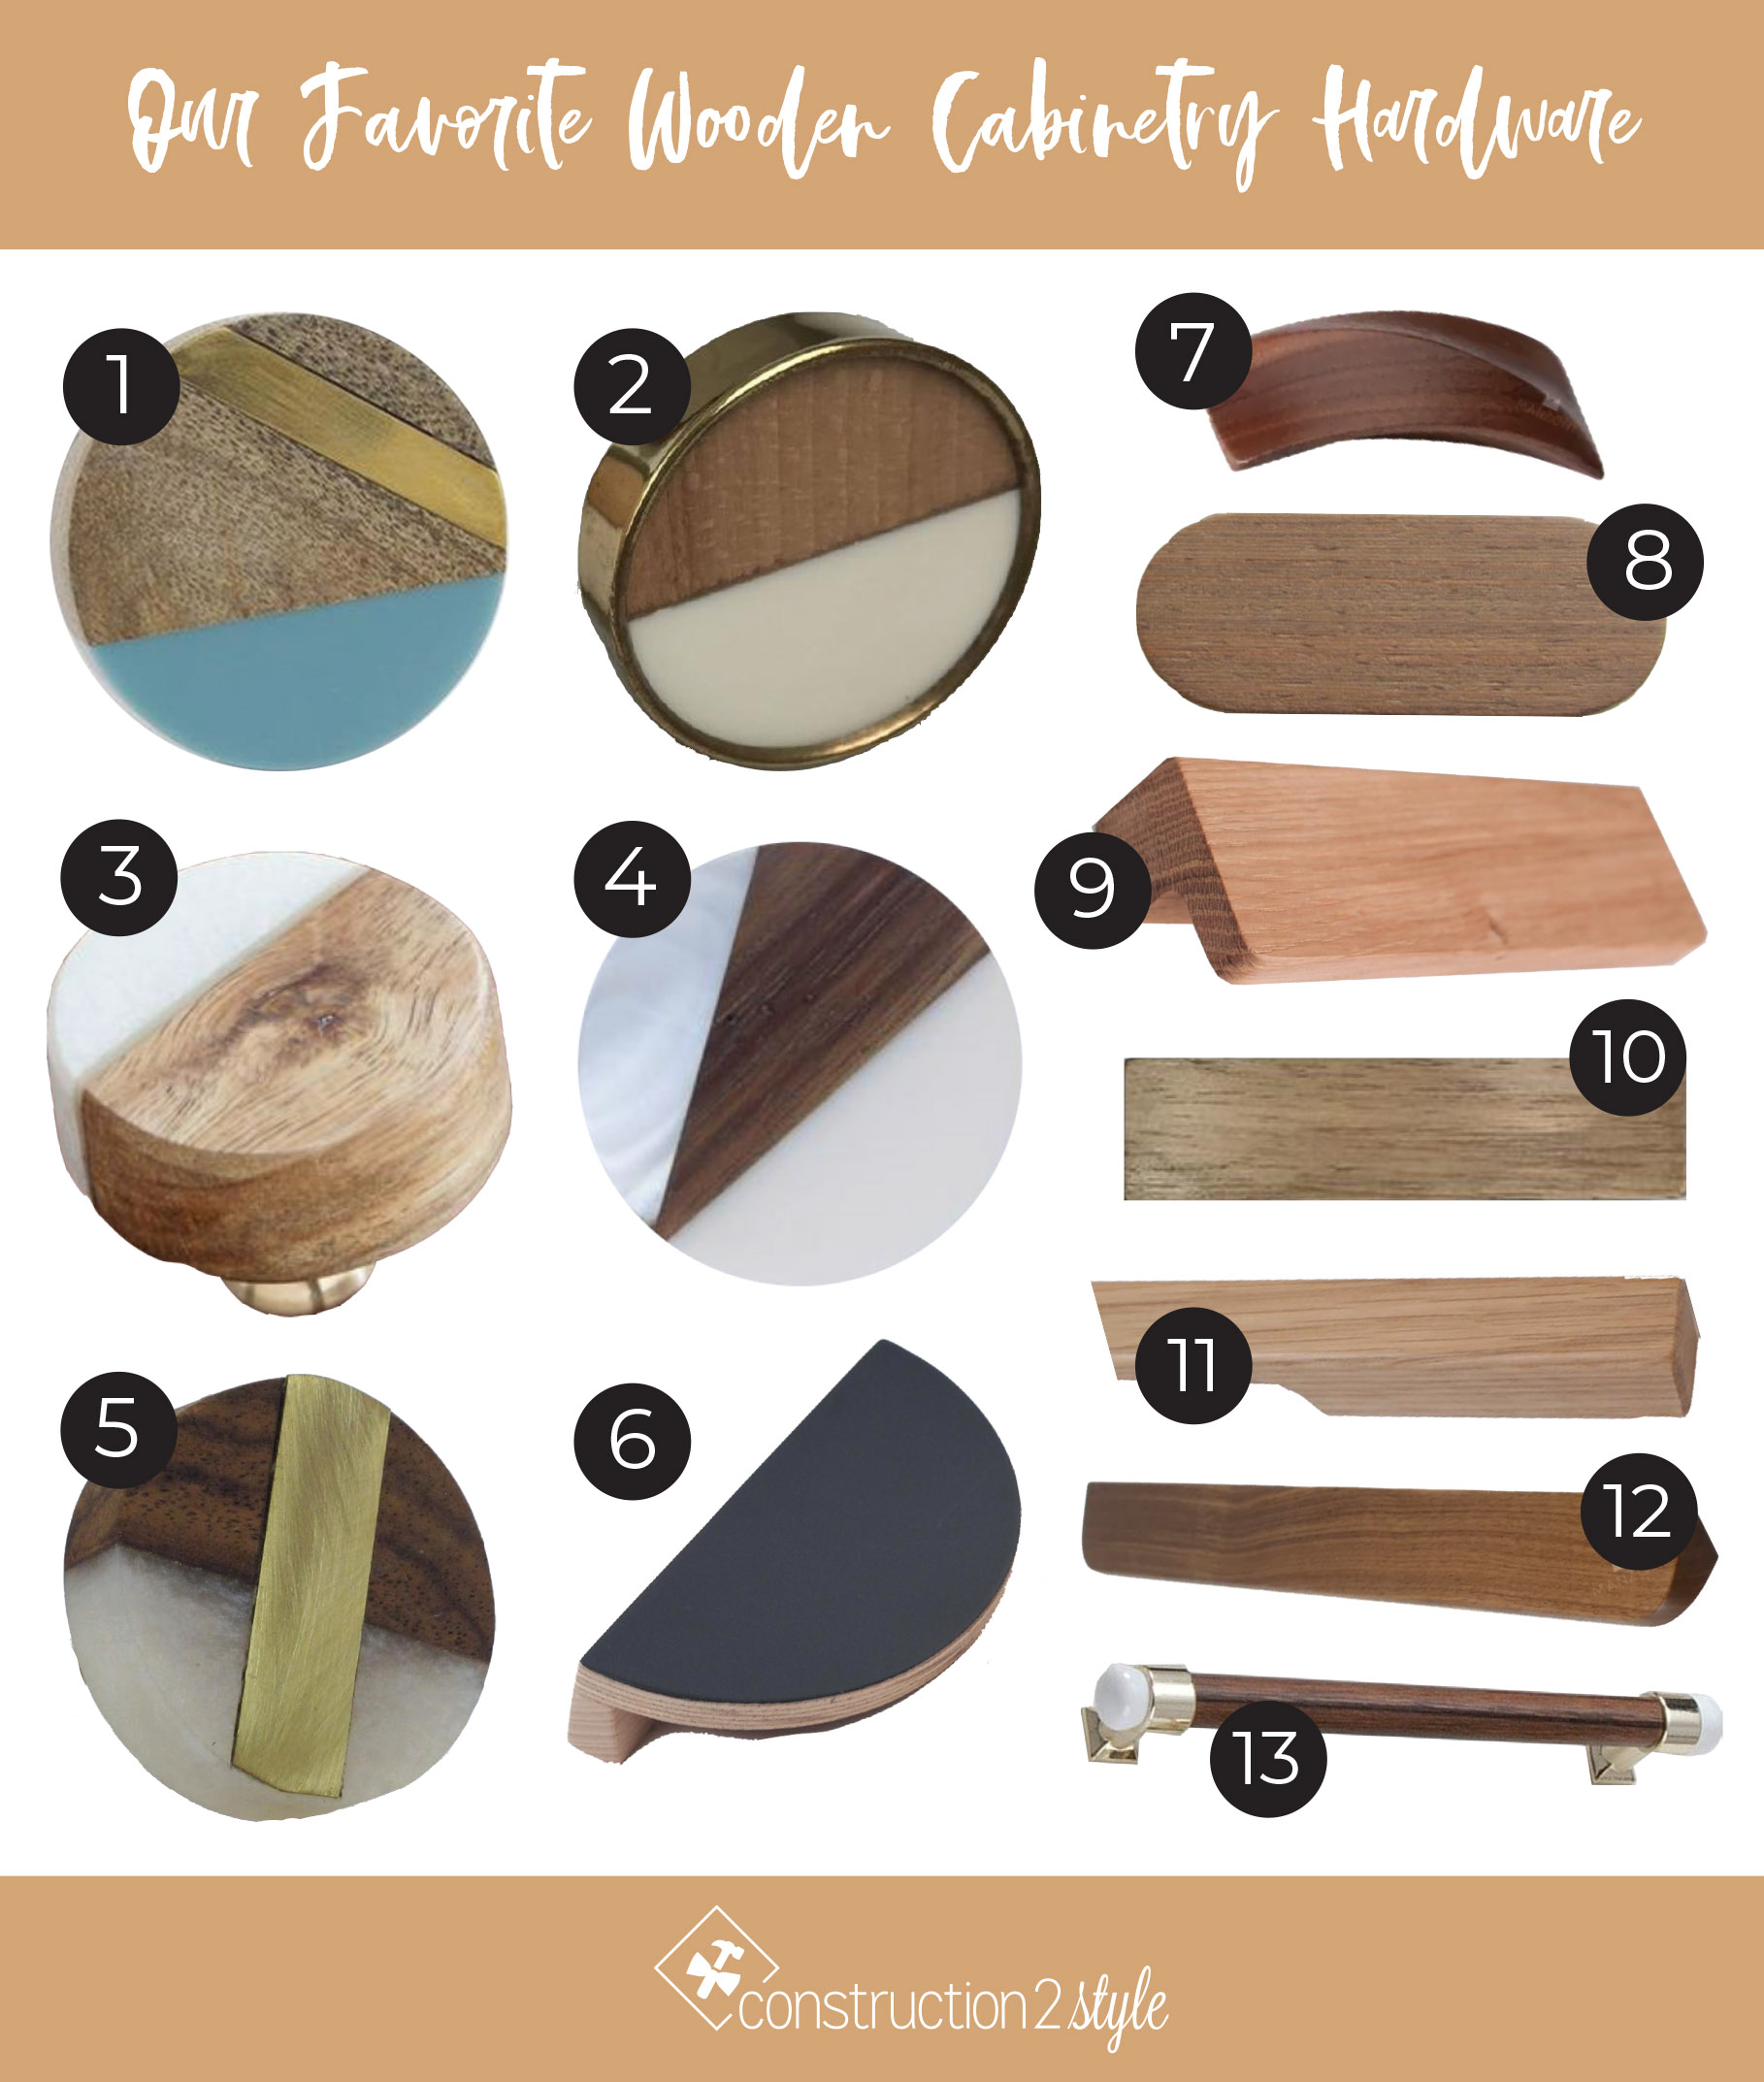 Our Favorite Wooden Cabinetry Hardware 2